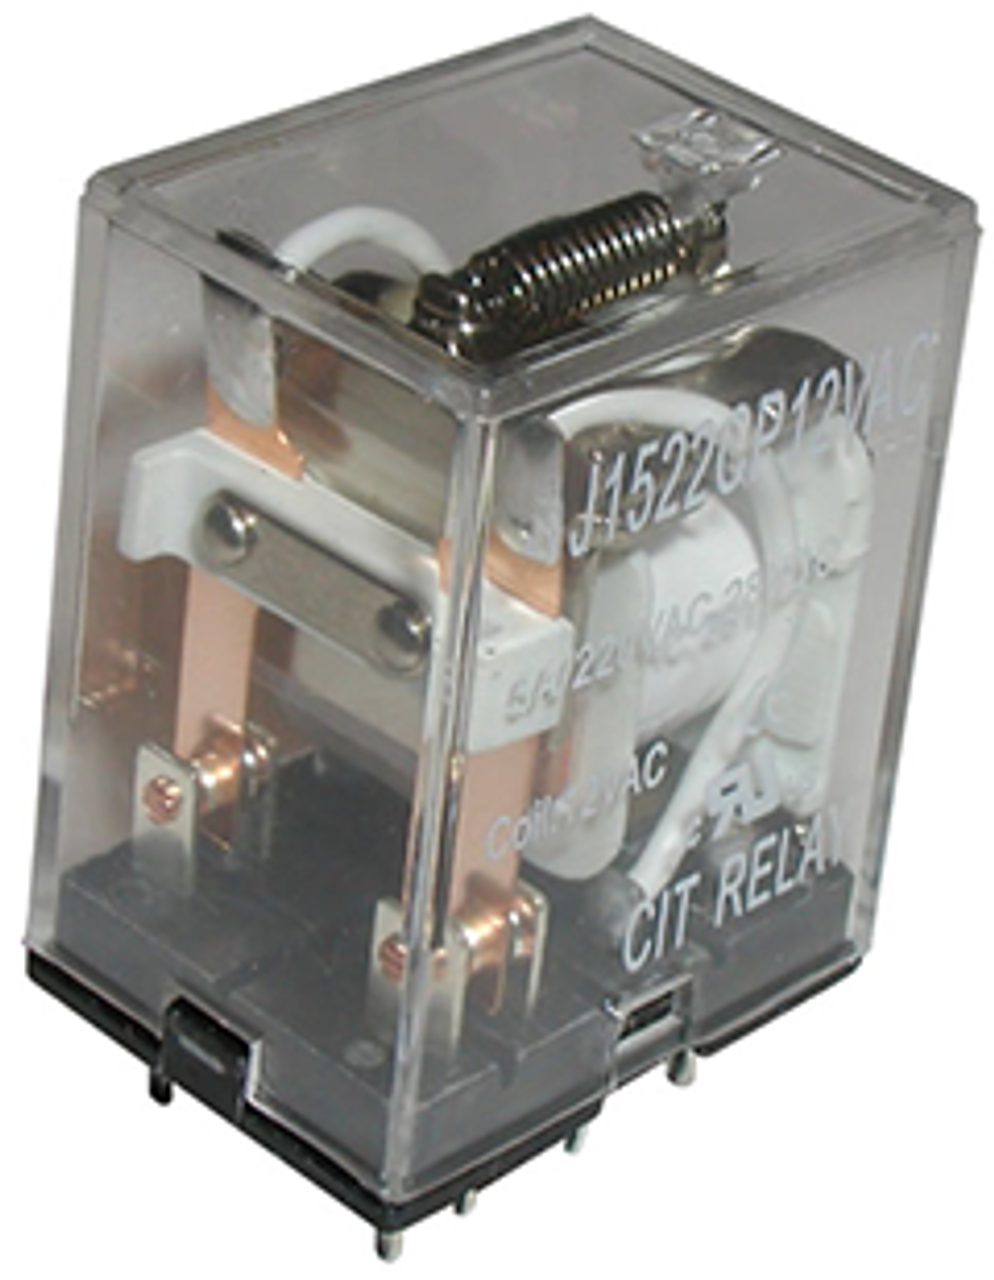 CIT Relay and Switch J1524CP110VDCDT Industrial Relays